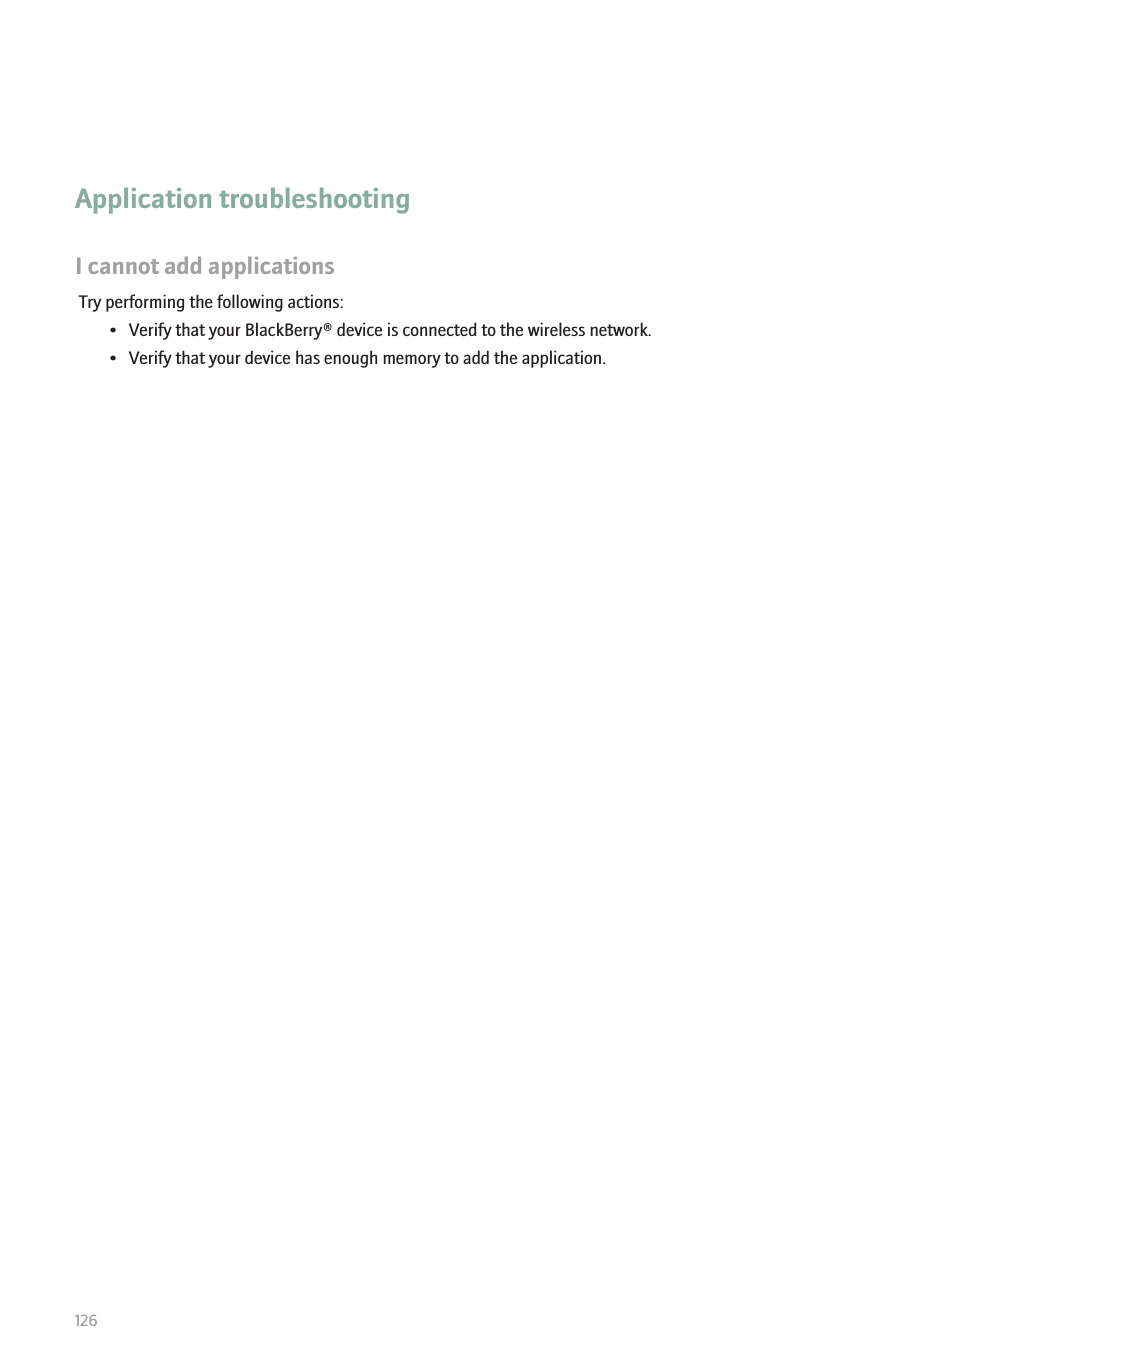 Application troubleshootingI cannot add applicationsTry performing the following actions:• Verify that your BlackBerry® device is connected to the wireless network.• Verify that your device has enough memory to add the application.126